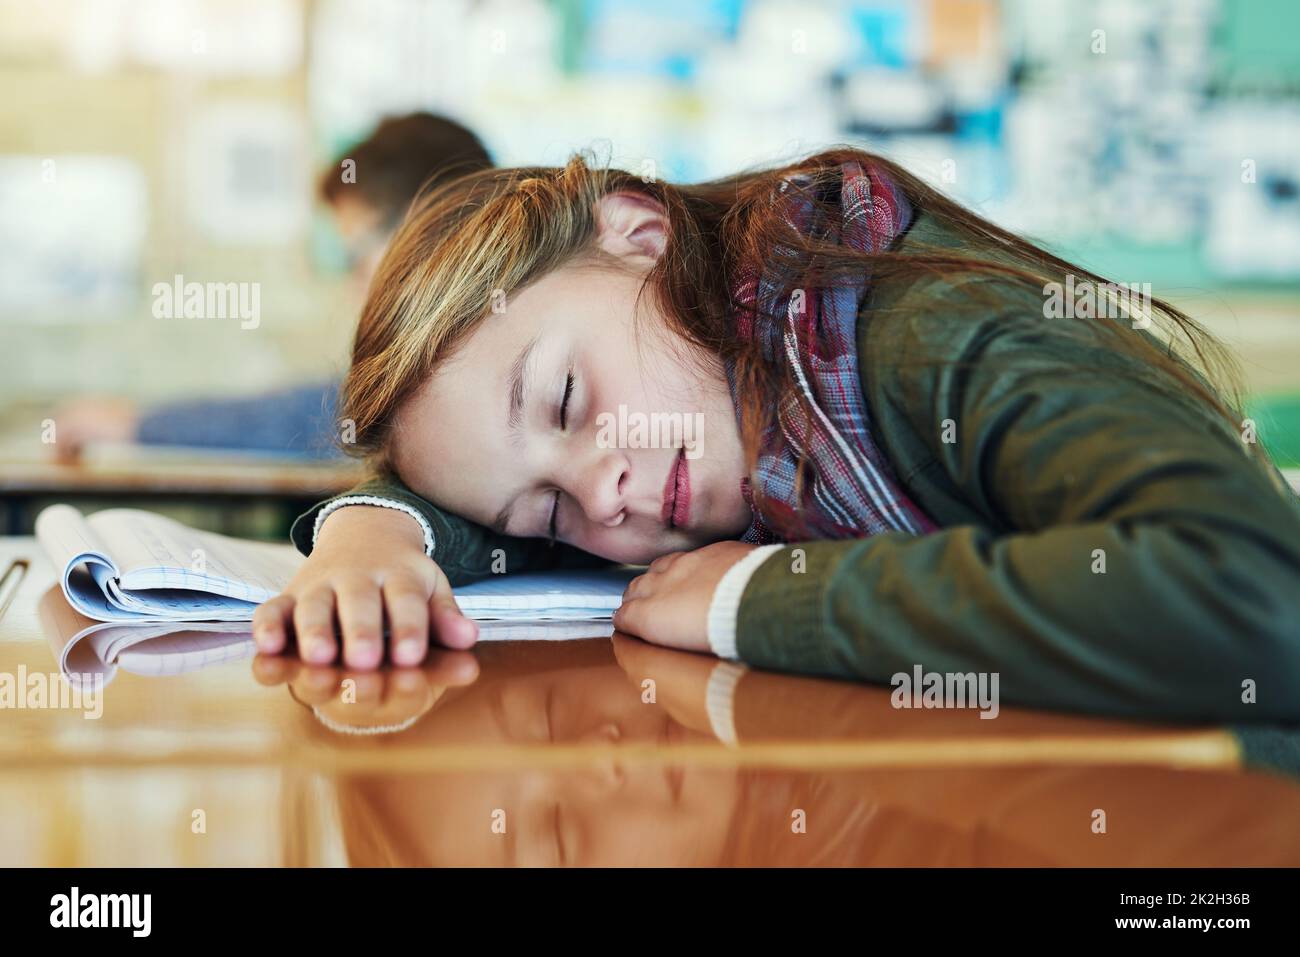 Shes refreshing her young mind. Shot of an adorable elementary schoolgirl taking a nap on her desk in class. Stock Photo